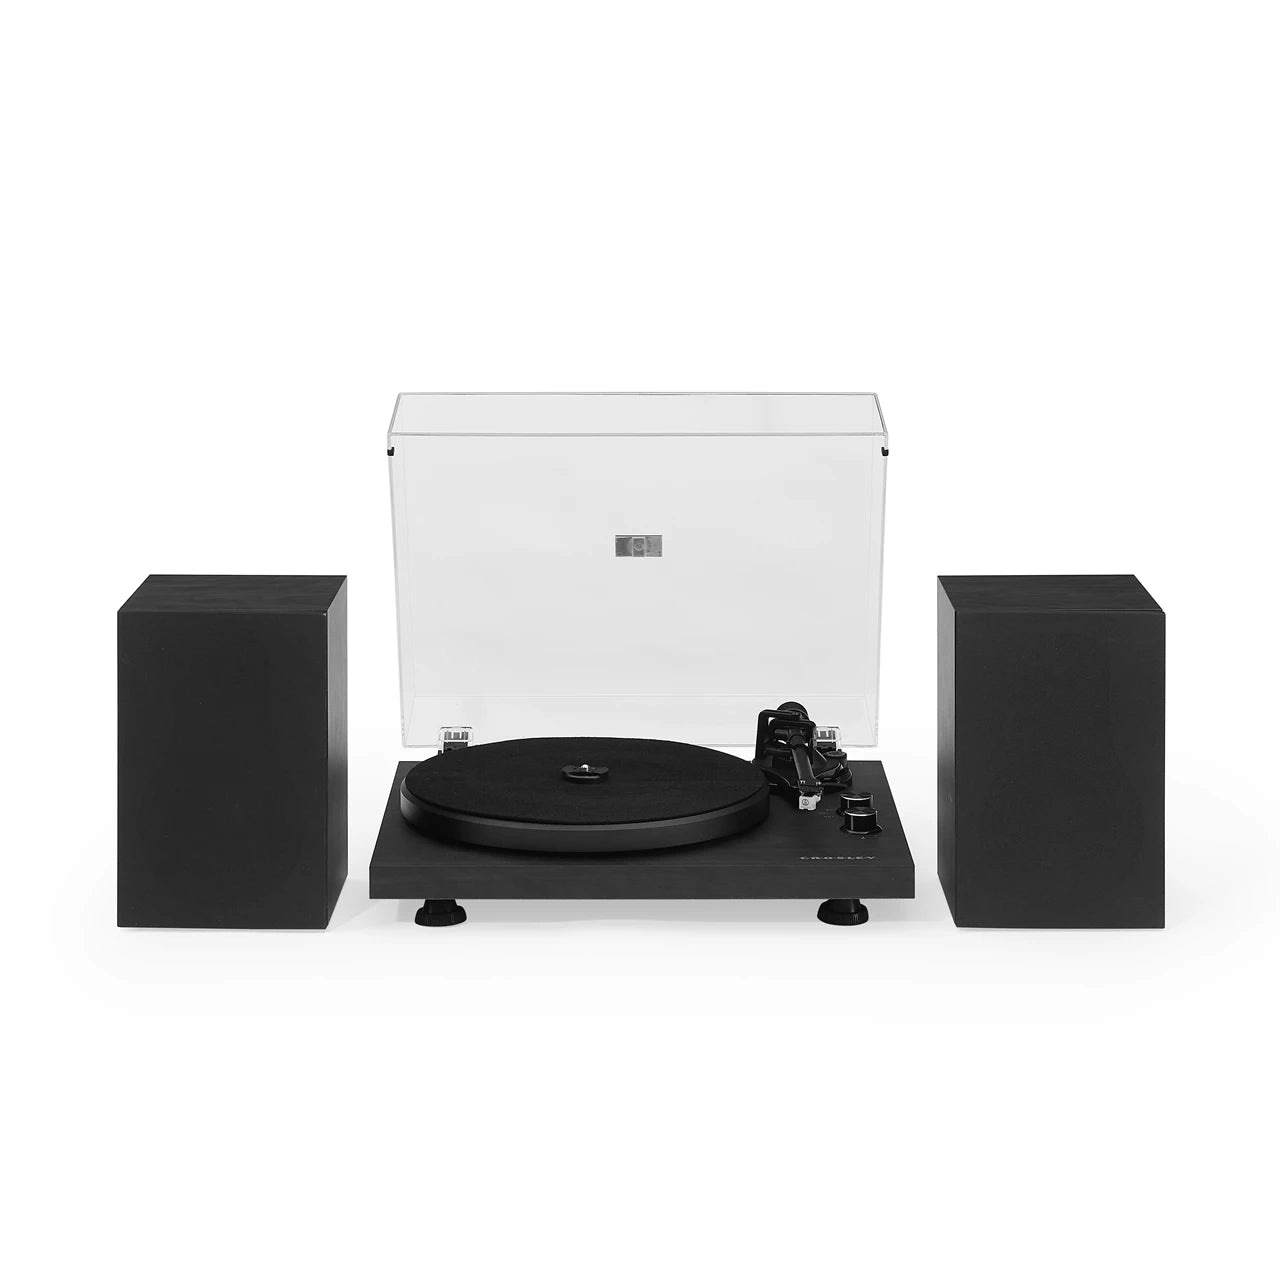 Crosley C62 - Turntable with Speakers (COLLECTION/LOCAL DELIVERY ONLY - NO SHIPPING)